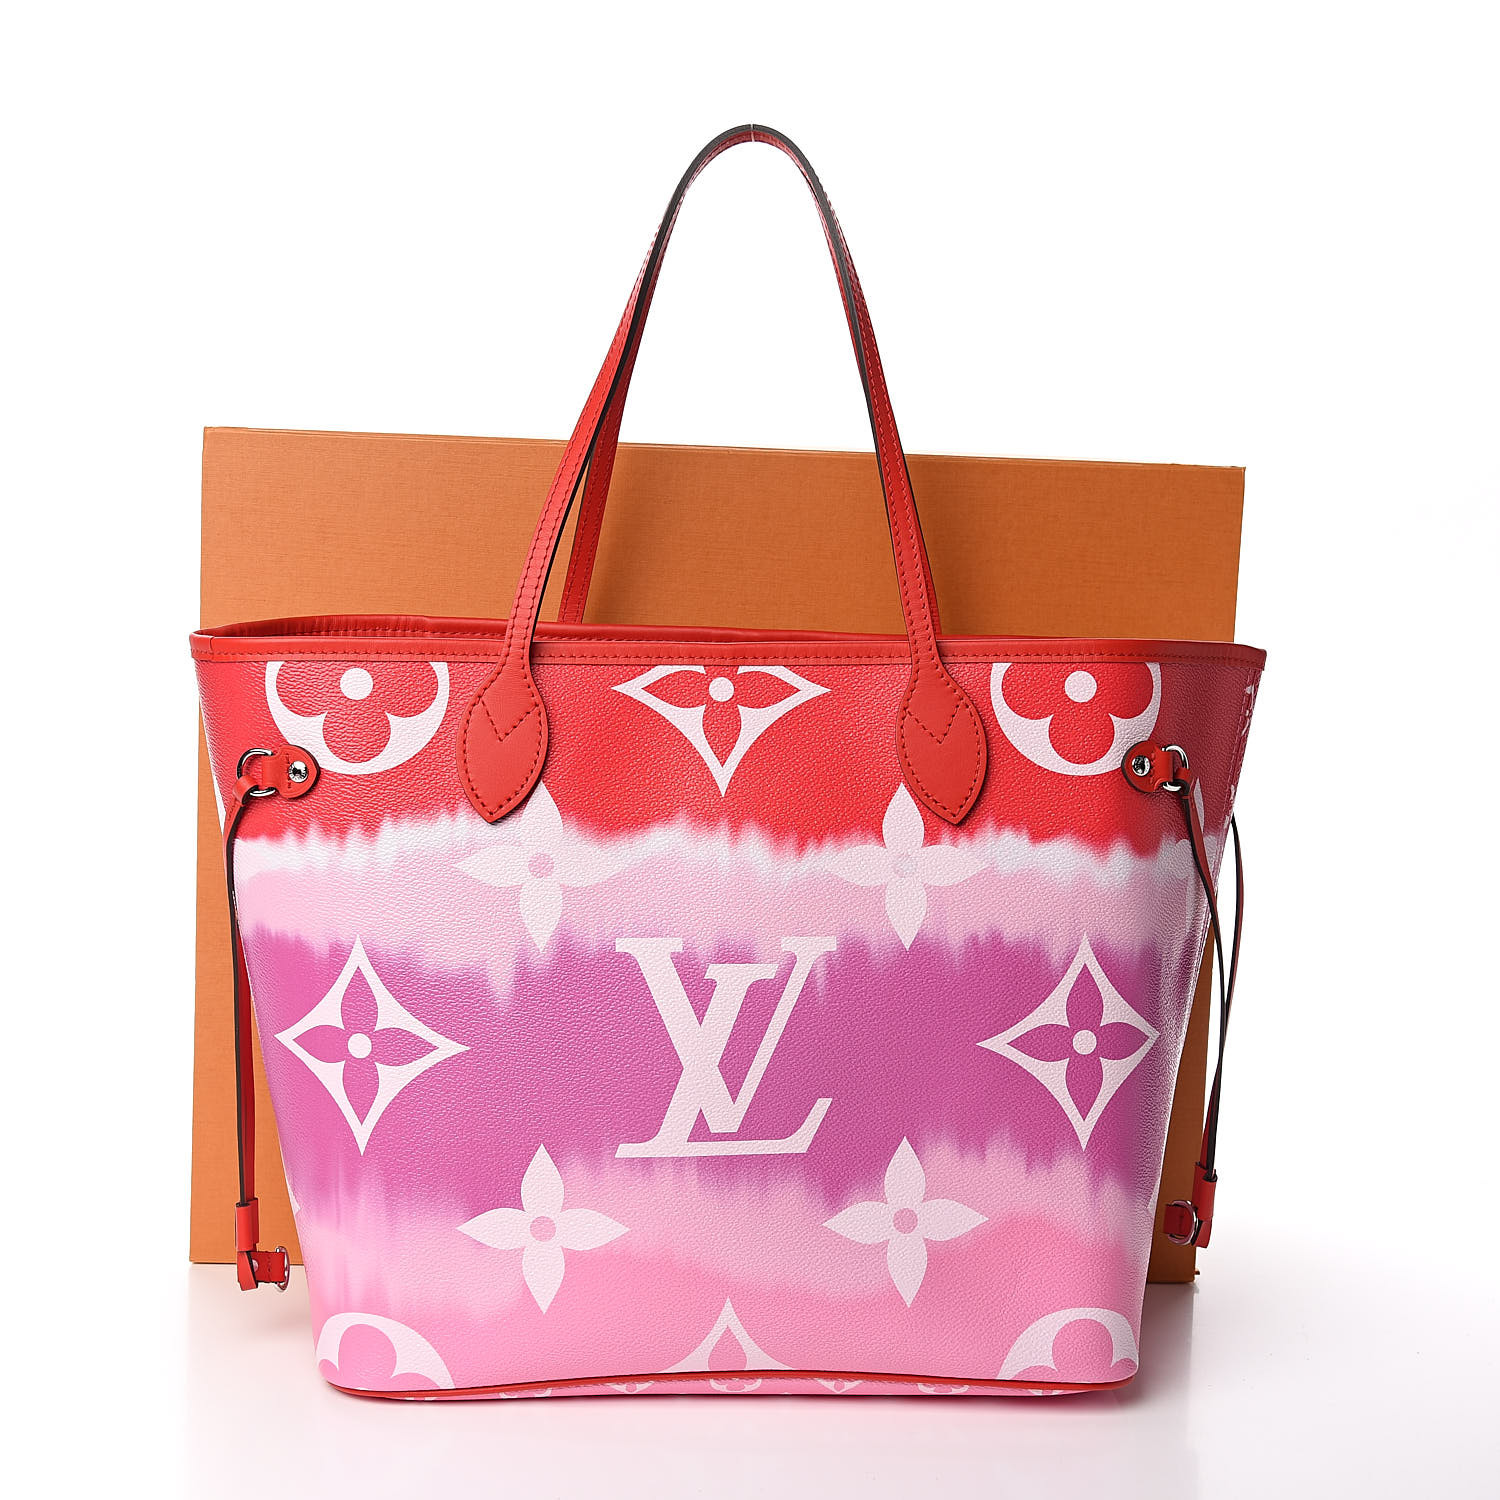 Louis Vuitton Red and Pink Monogram Escale Coated Canvas Neverfull mm Silver Hardware, 2020 (Like New), Womens Handbag